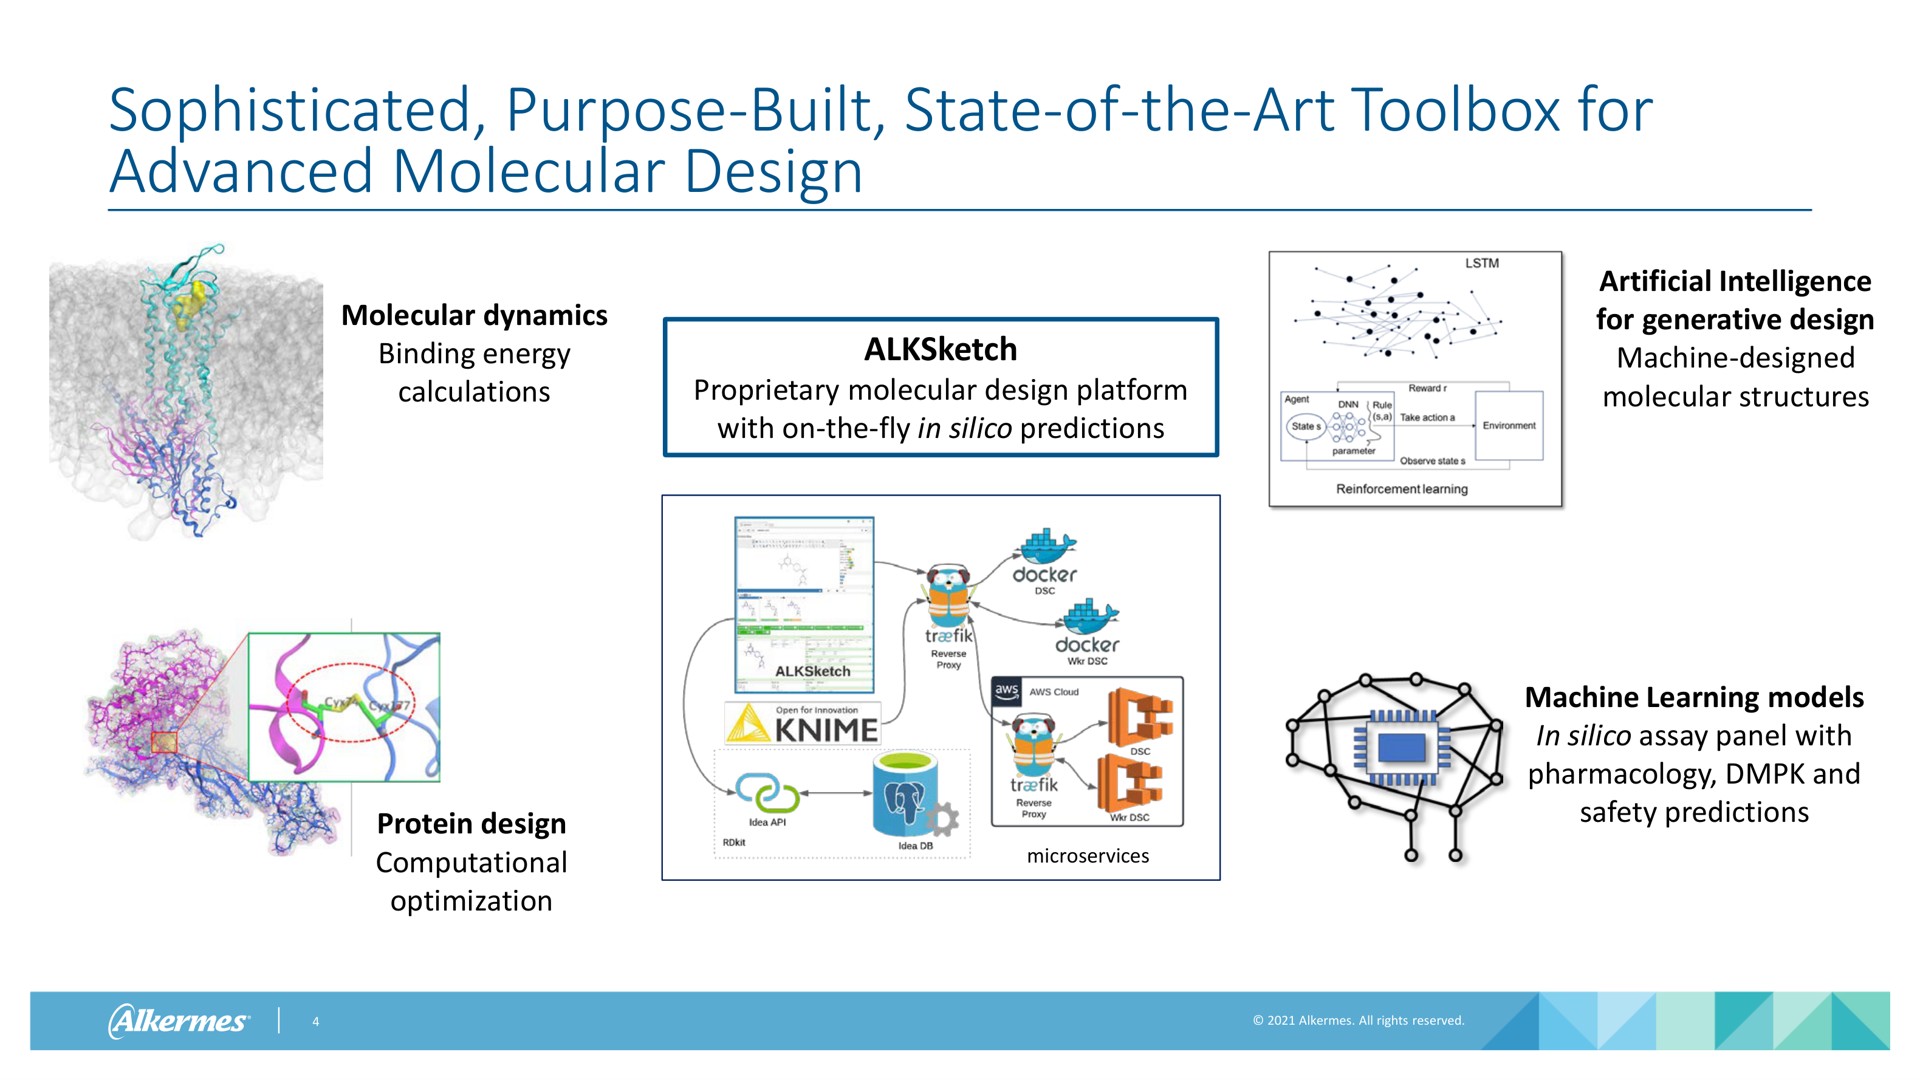 sophisticated purpose built state of the art toolbox for advanced molecular design molecular dynamics binding energy calculations proprietary molecular design platform with on the fly in silico predictions protein design computational optimization artificial intelligence for generative design machine designed molecular structures machine learning models in silico assay panel with pharmacology and safety predictions i | Alkermes